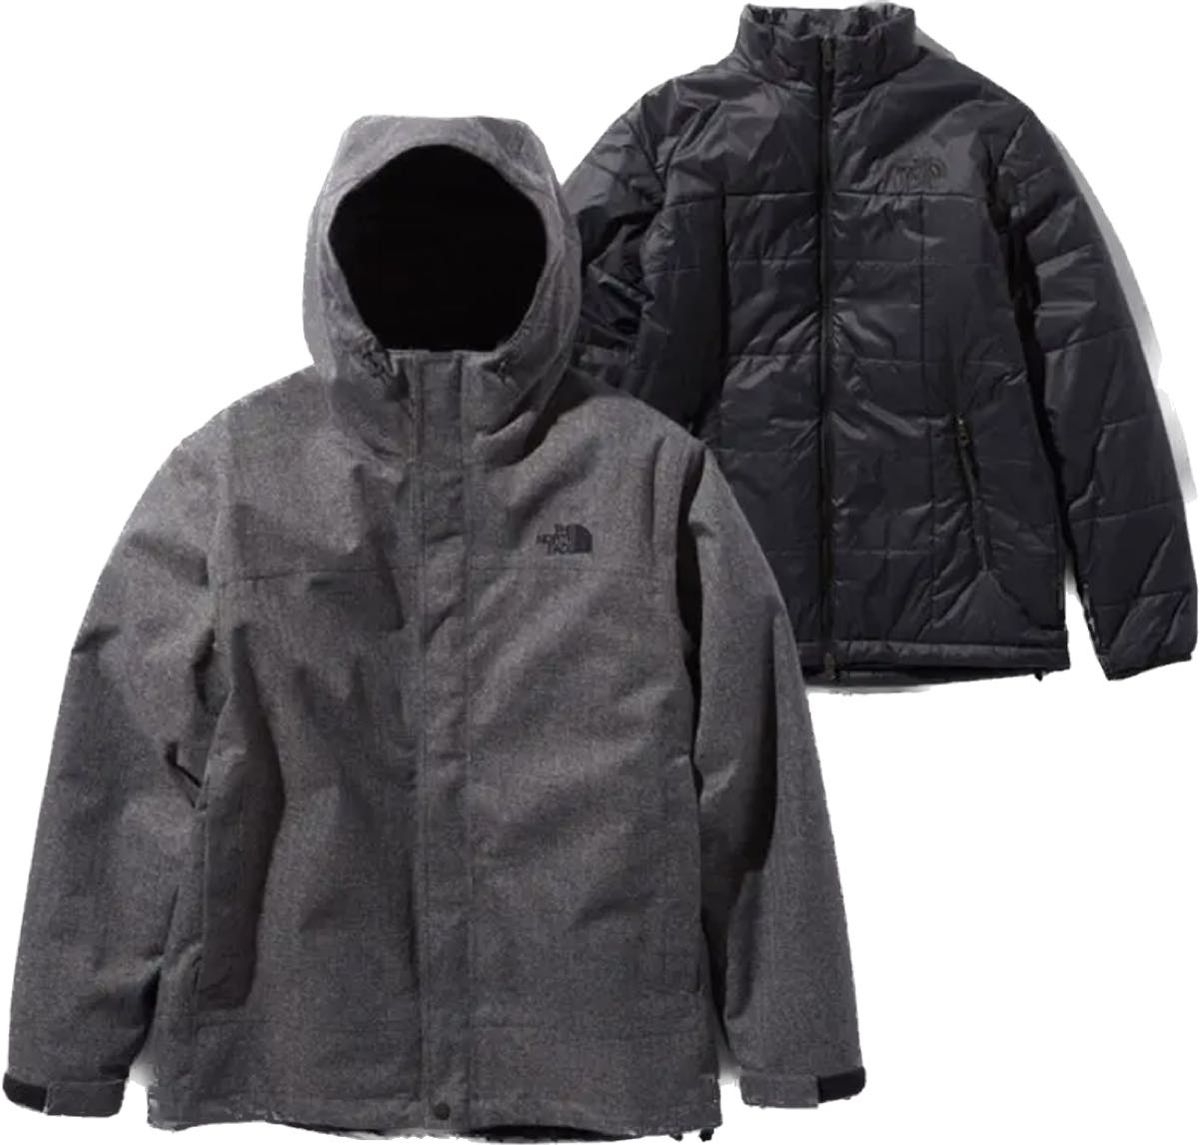 THE NORTH FACE　ライナー付　Zeus Triclimate Jacket　ダウンジャケット　NP61421 used